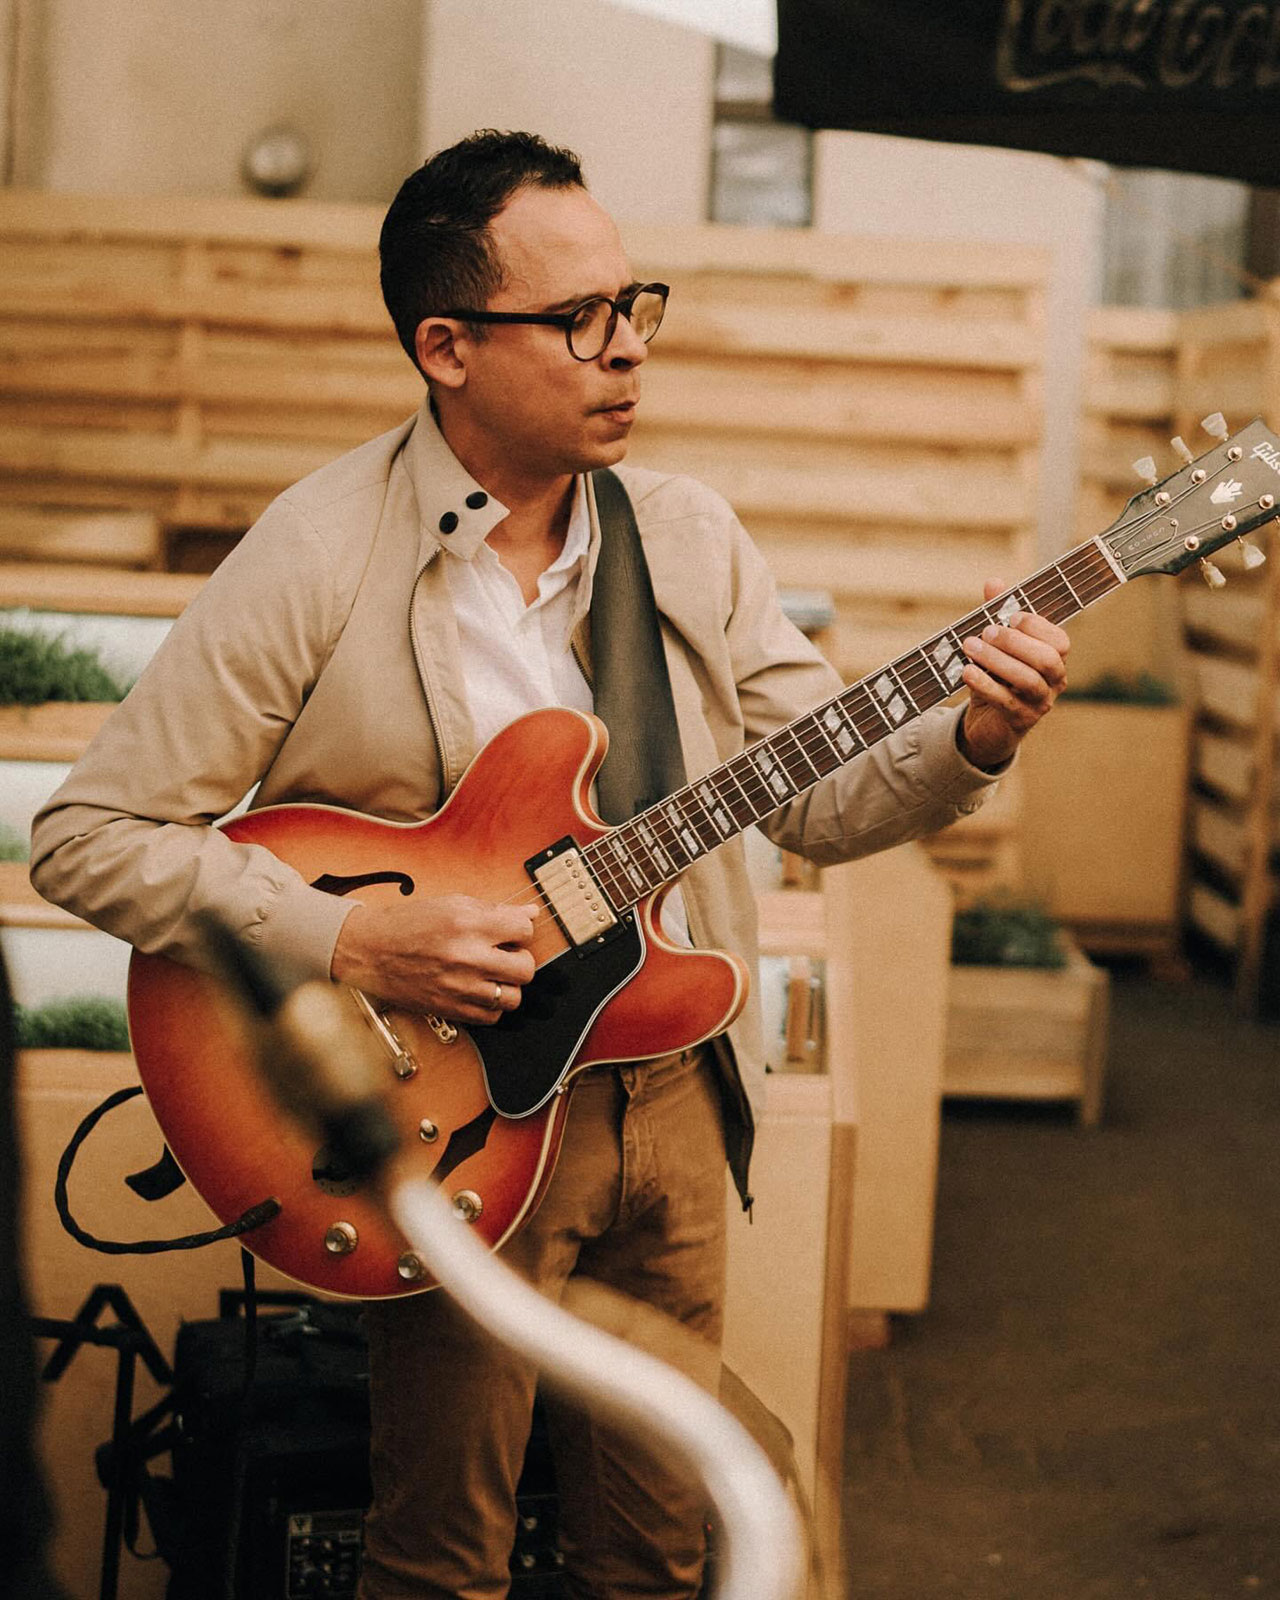 Jazz guitar masterclass 2024 - Exploring the Jazz Frontier with Neff Irizarry - Exclusive Insights Ahead of the Masterclass on October 4-5th 2024 in Germany - Luthiers.com